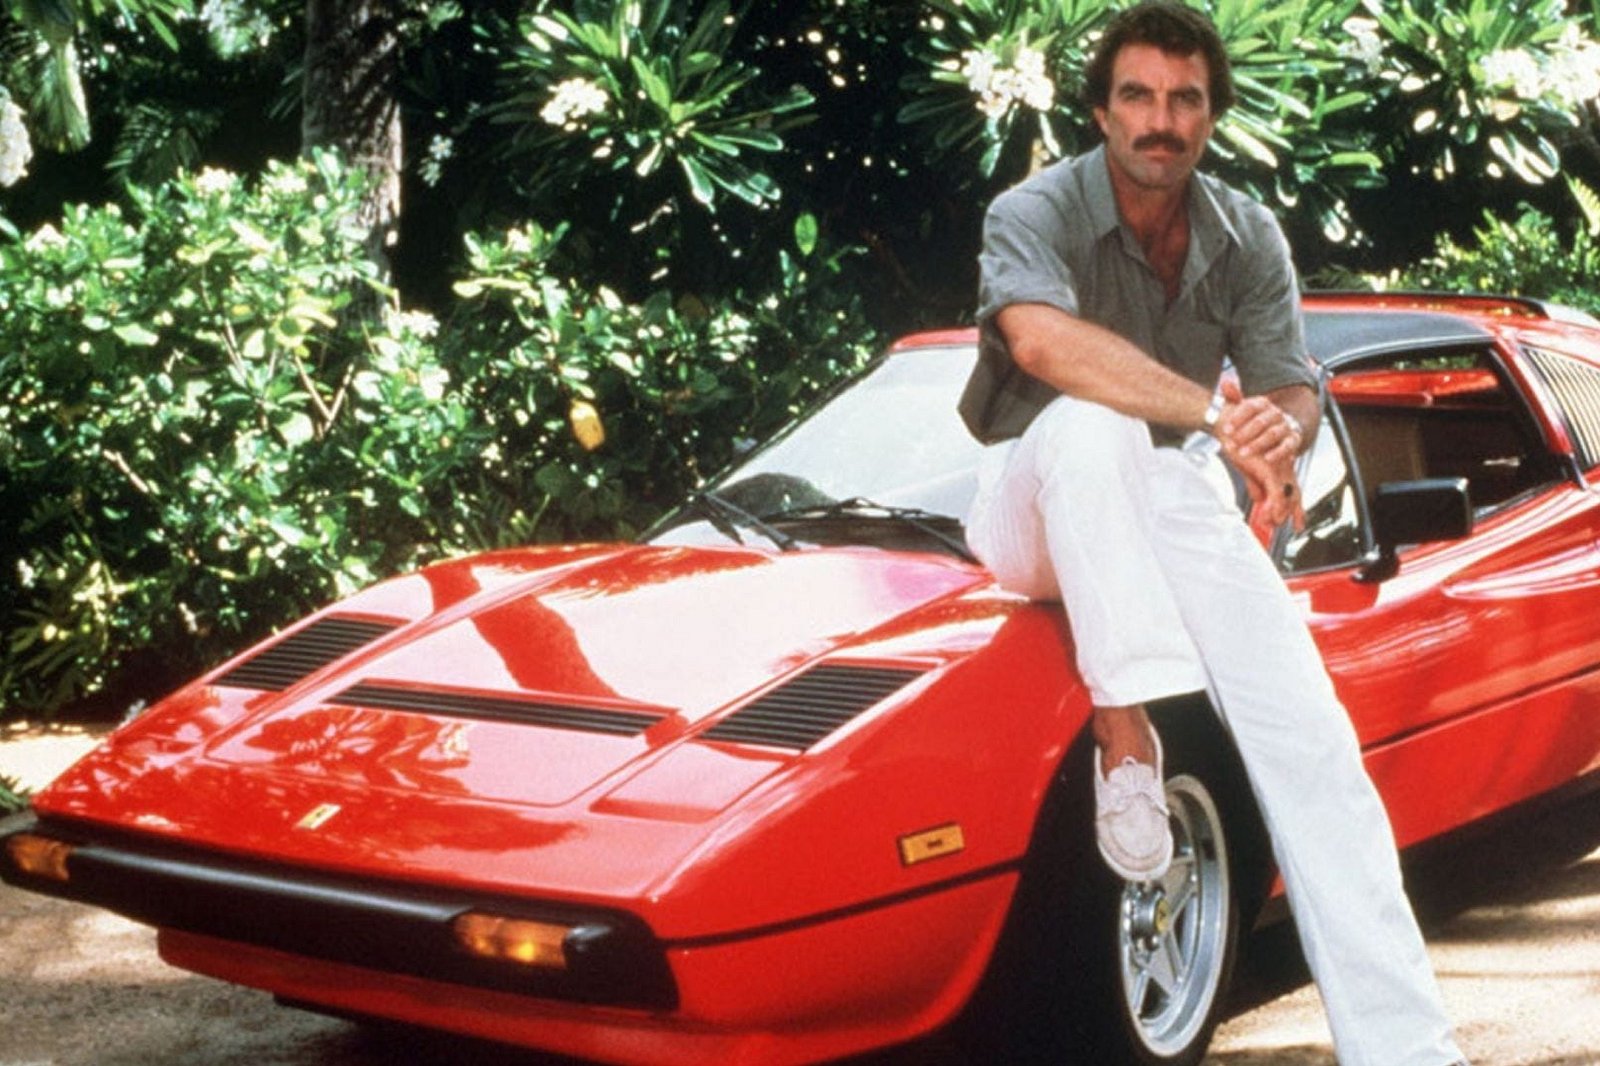 offbeat, tv's most iconic ferrari from magnum p.i. immortalized in new children's play set